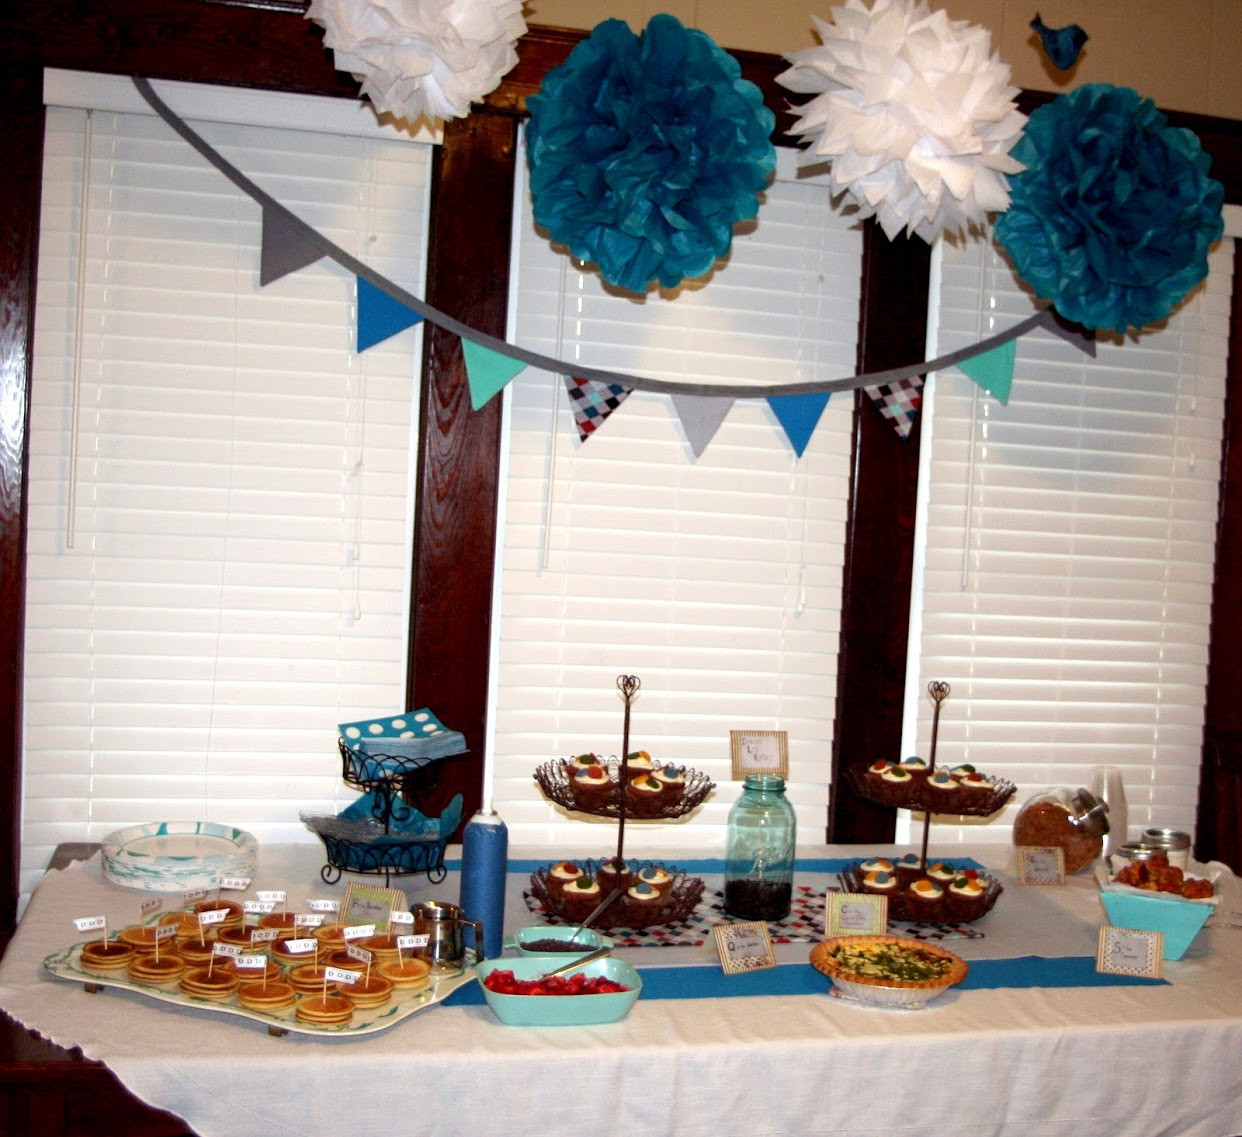 Baby Shower Ideas For Boys Decorations
 Baby Shower Decorations For Boys Ideas